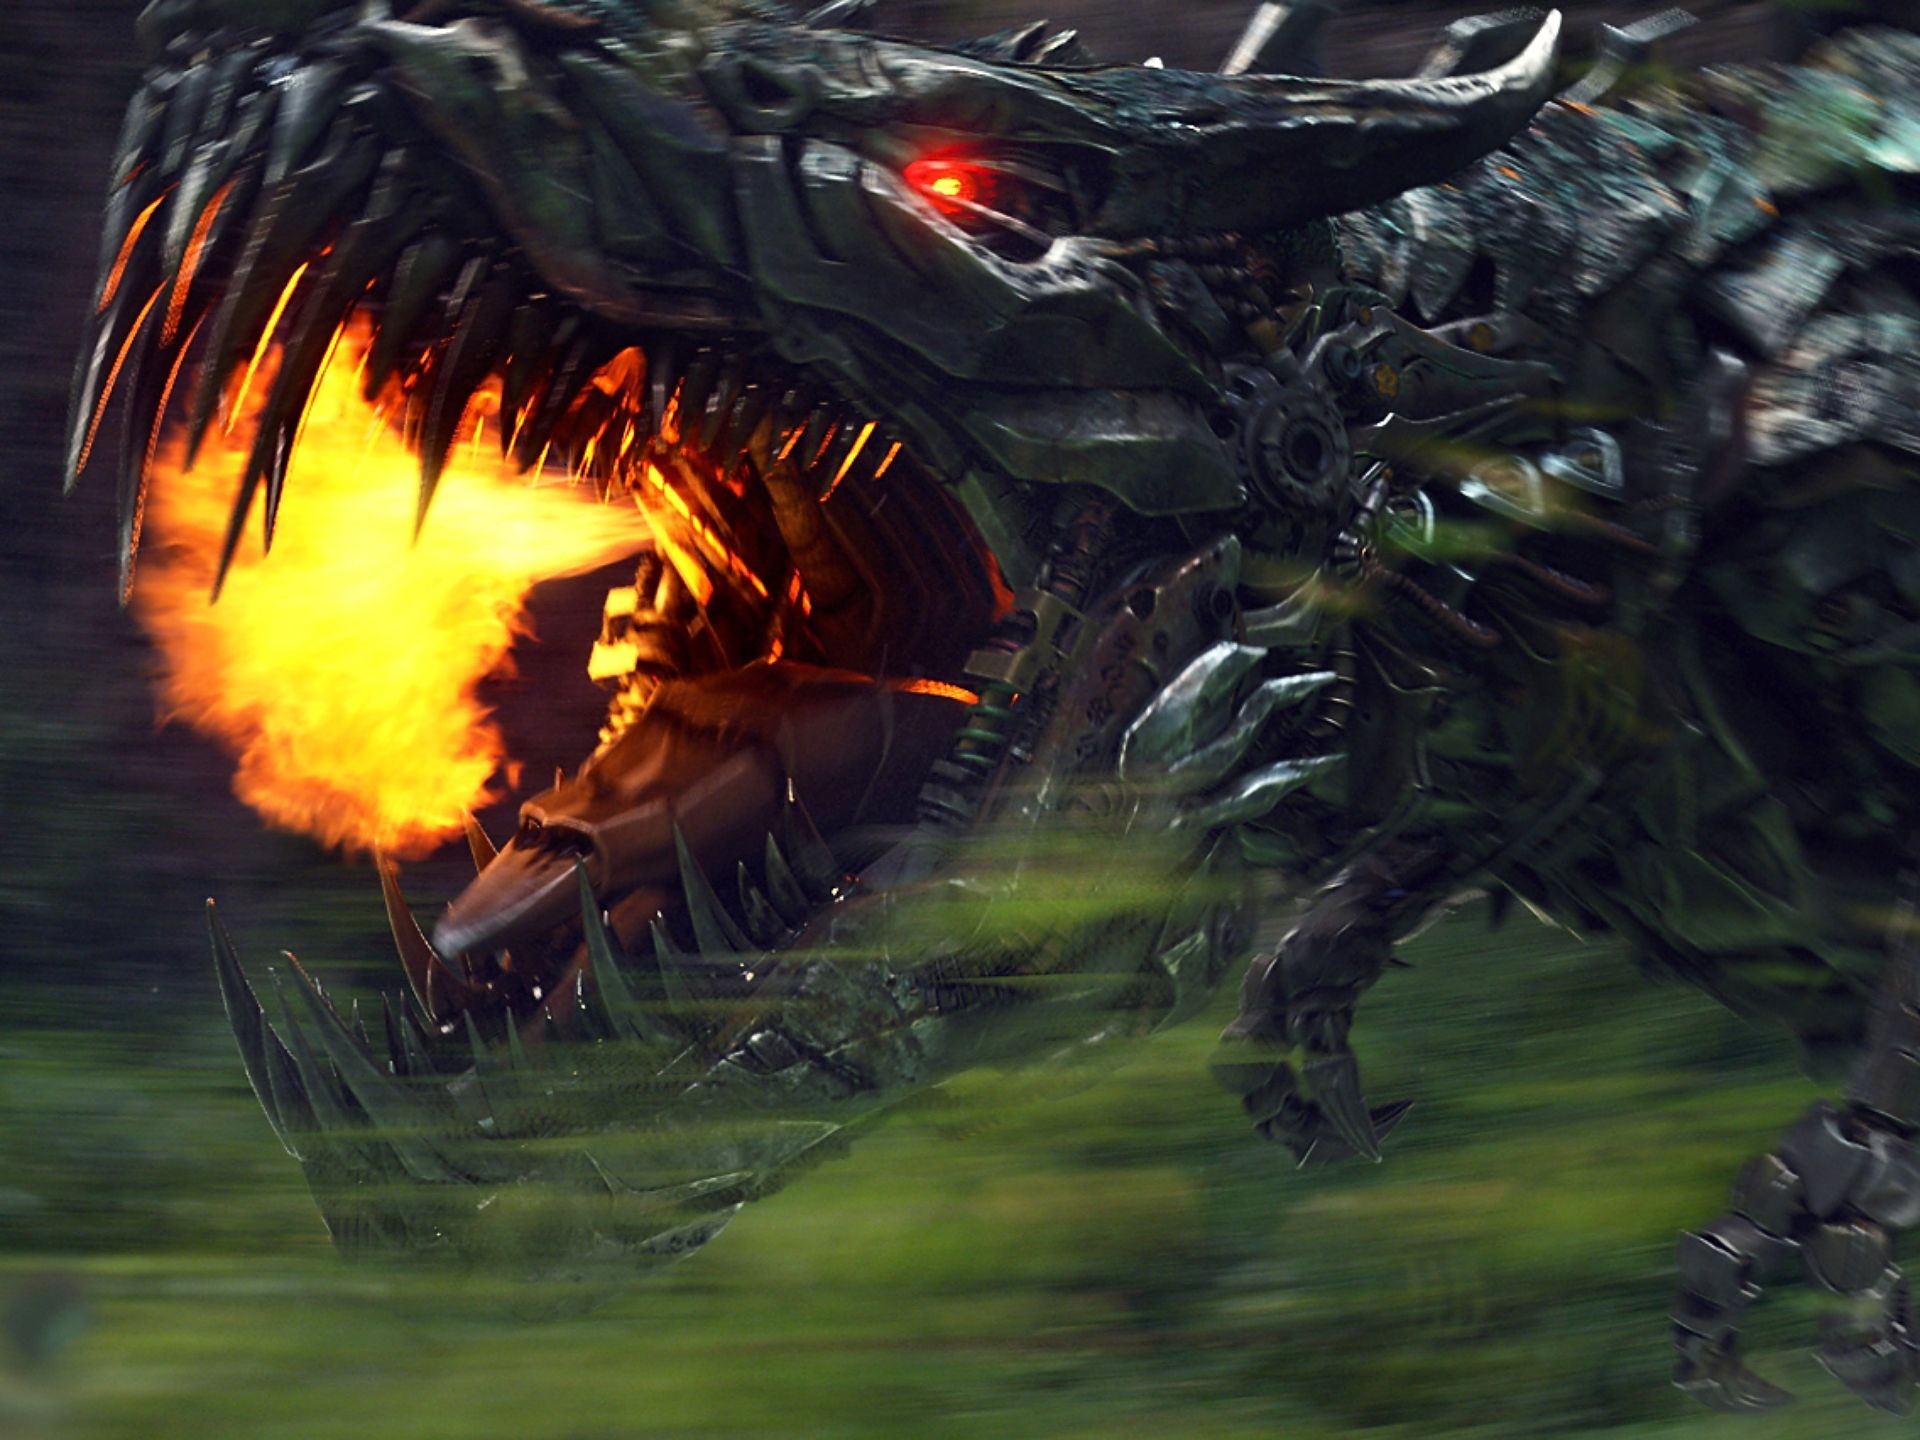 Dinobots from Paramount Pictures' Transformers: Age of Extinction (2014)